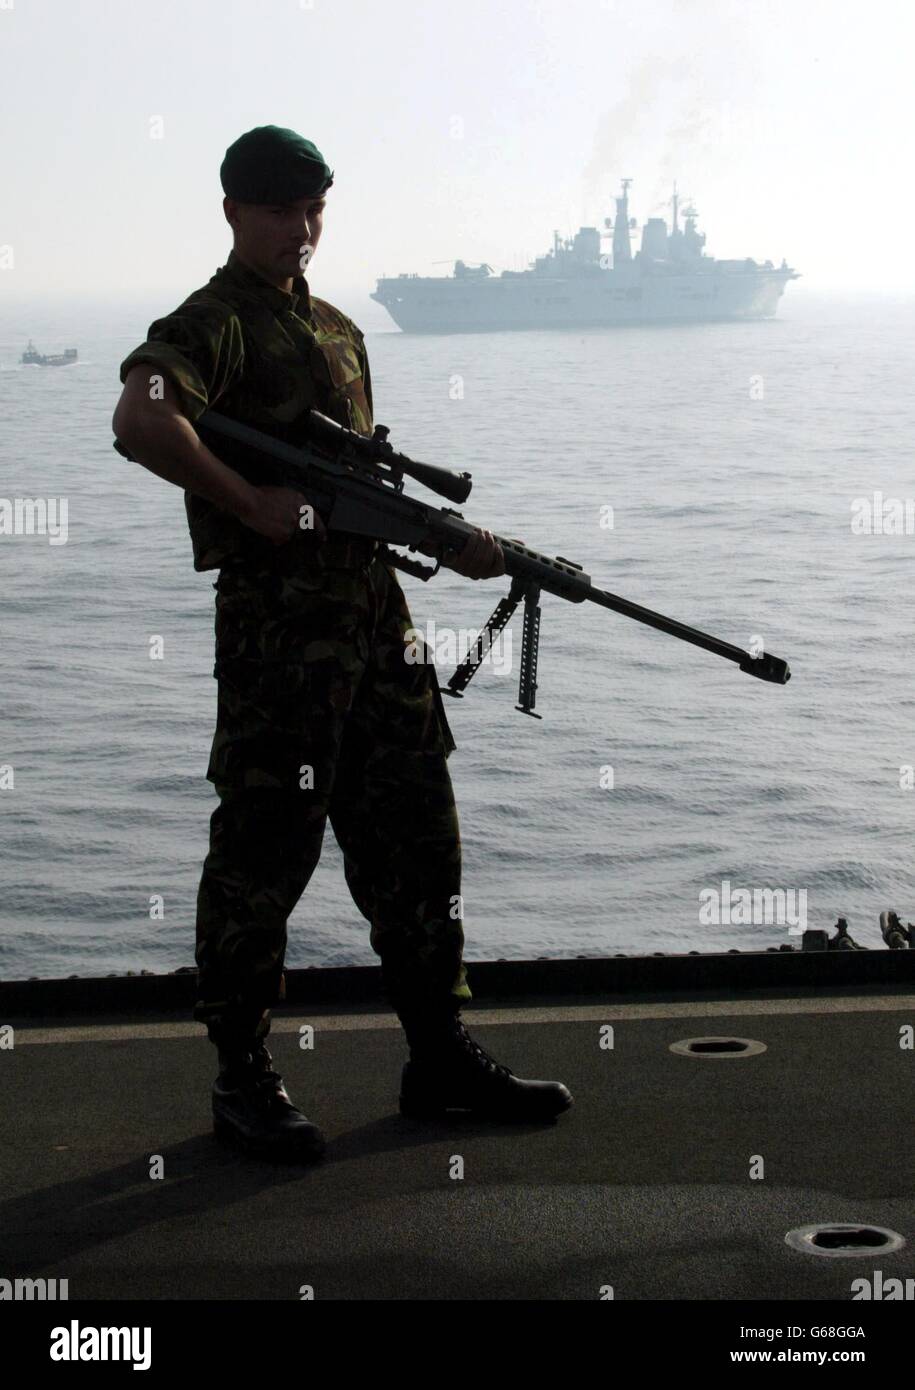 A Royal Marine from 40 Commando stands on the deck of British helicopter carrier HMS Ocean, with the HMS Ark Royal in the background, as they travel through the Persian Gulf. Stock Photo